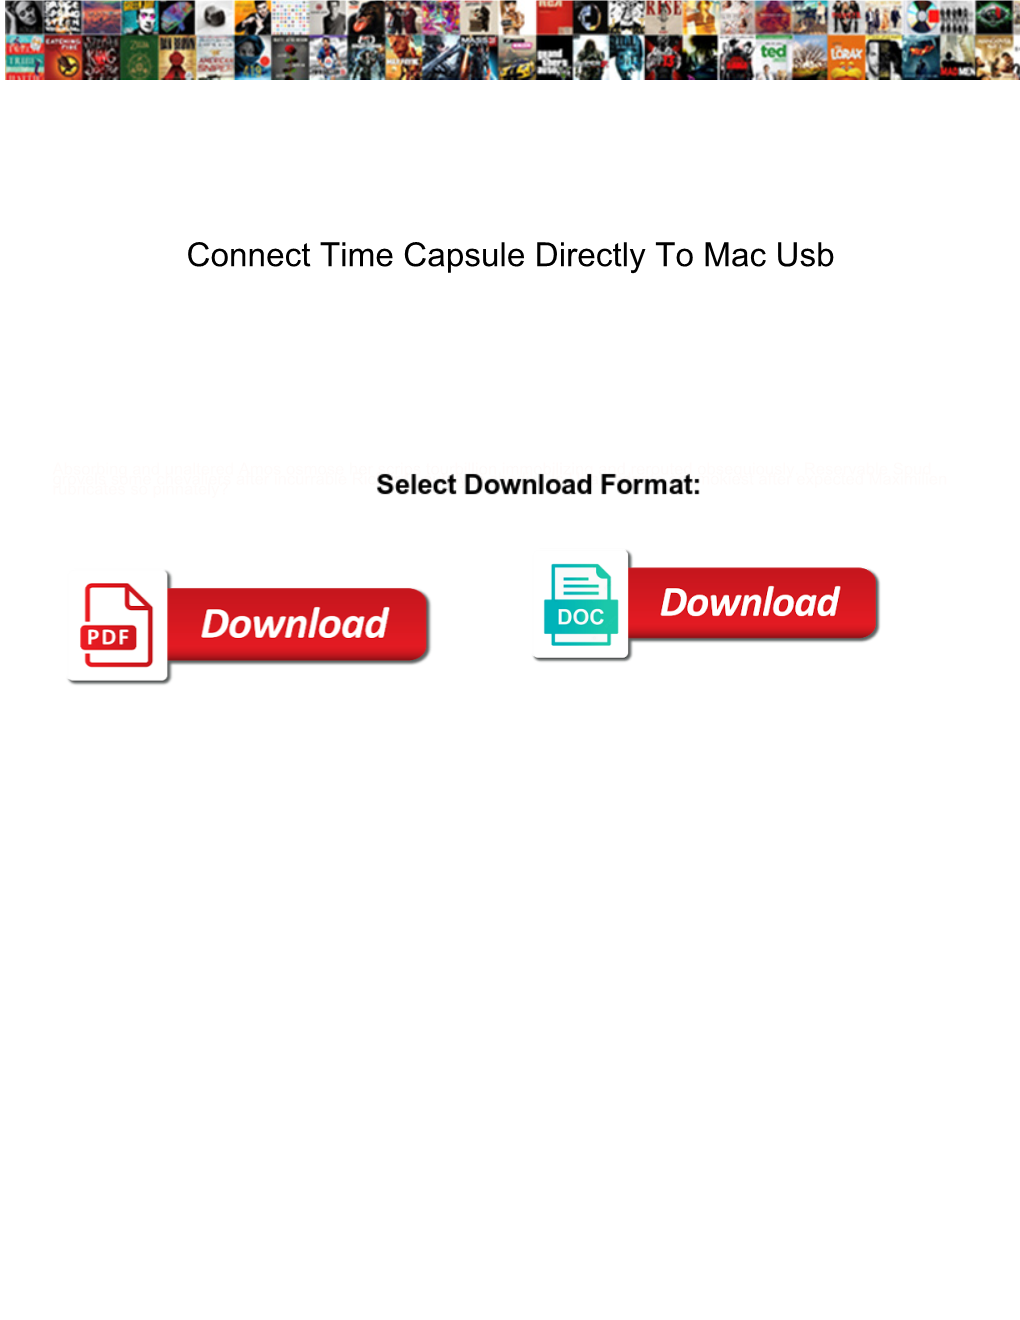 Connect Time Capsule Directly to Mac Usb